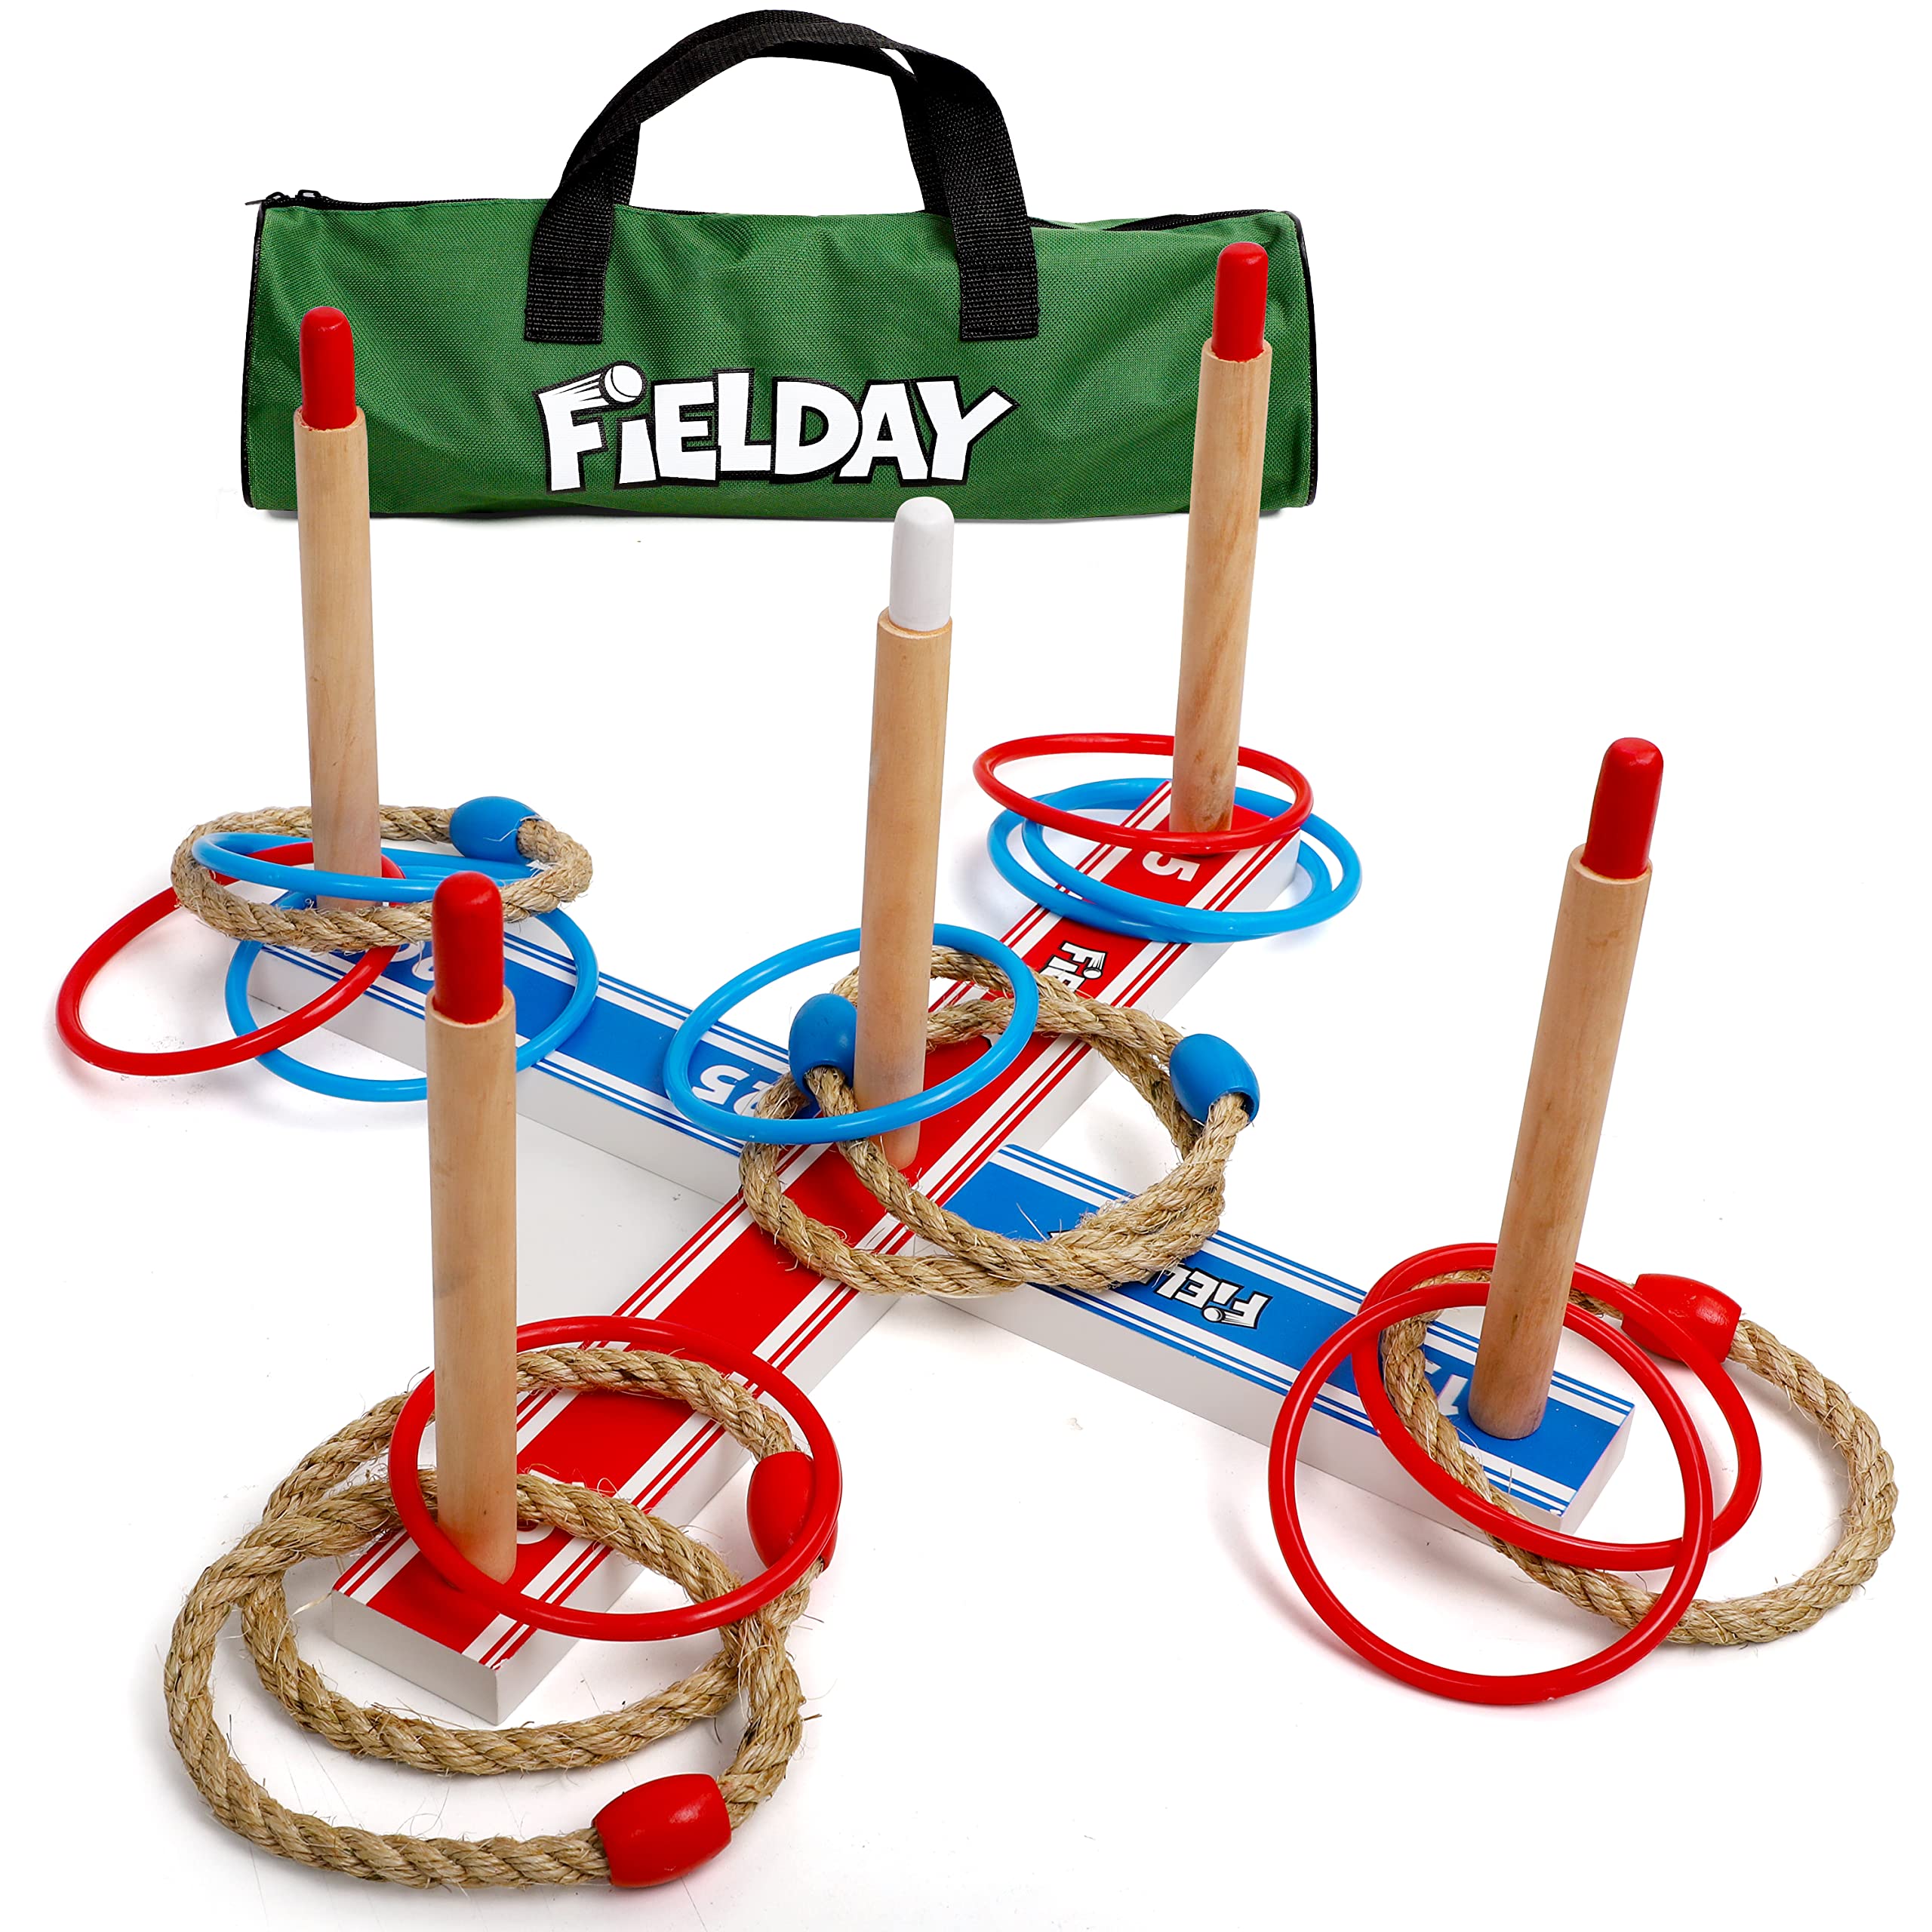 Premium Ring Toss Game Set for Kids & Adults - Includes 8 Rope & 8 Plastic  Rings - Improves Hand-Eye Coordination, Great Outdoor Fun